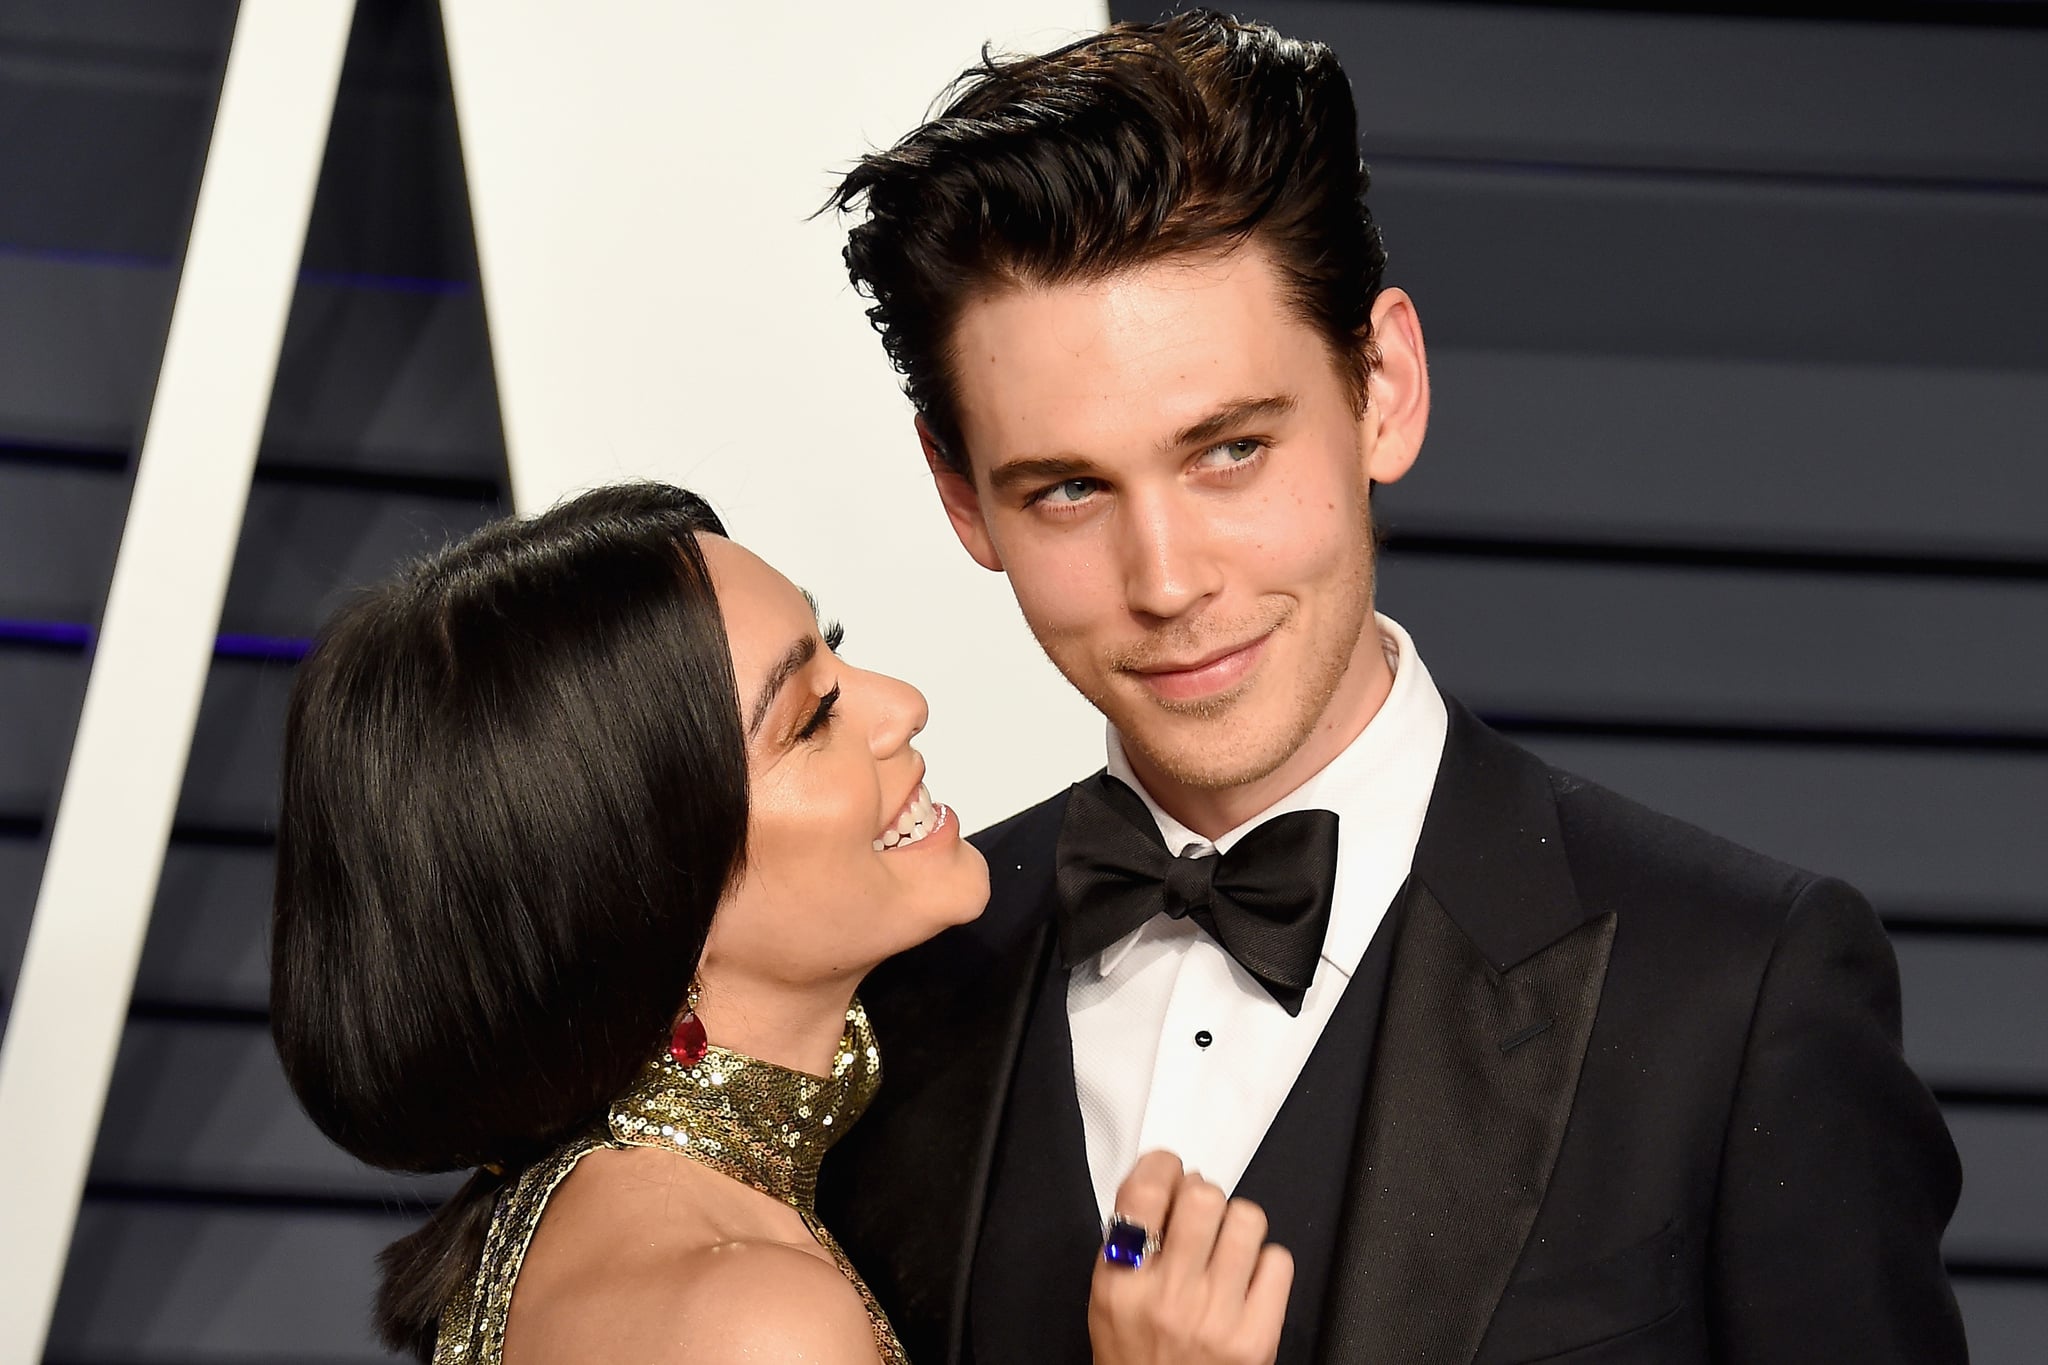 BEVERLY HILLS, CA - FEBRUARY 24: Vanessa Hudgens (L) and Austin Butler attend the 2019 Vanity Fair Oscar Party hosted by Radhika Jones at Wallis Annenberg Center for the Performing Arts on February 24, 2019 in Beverly Hills, California.  (Photo by Gregg DeGuire/FilmMagic)